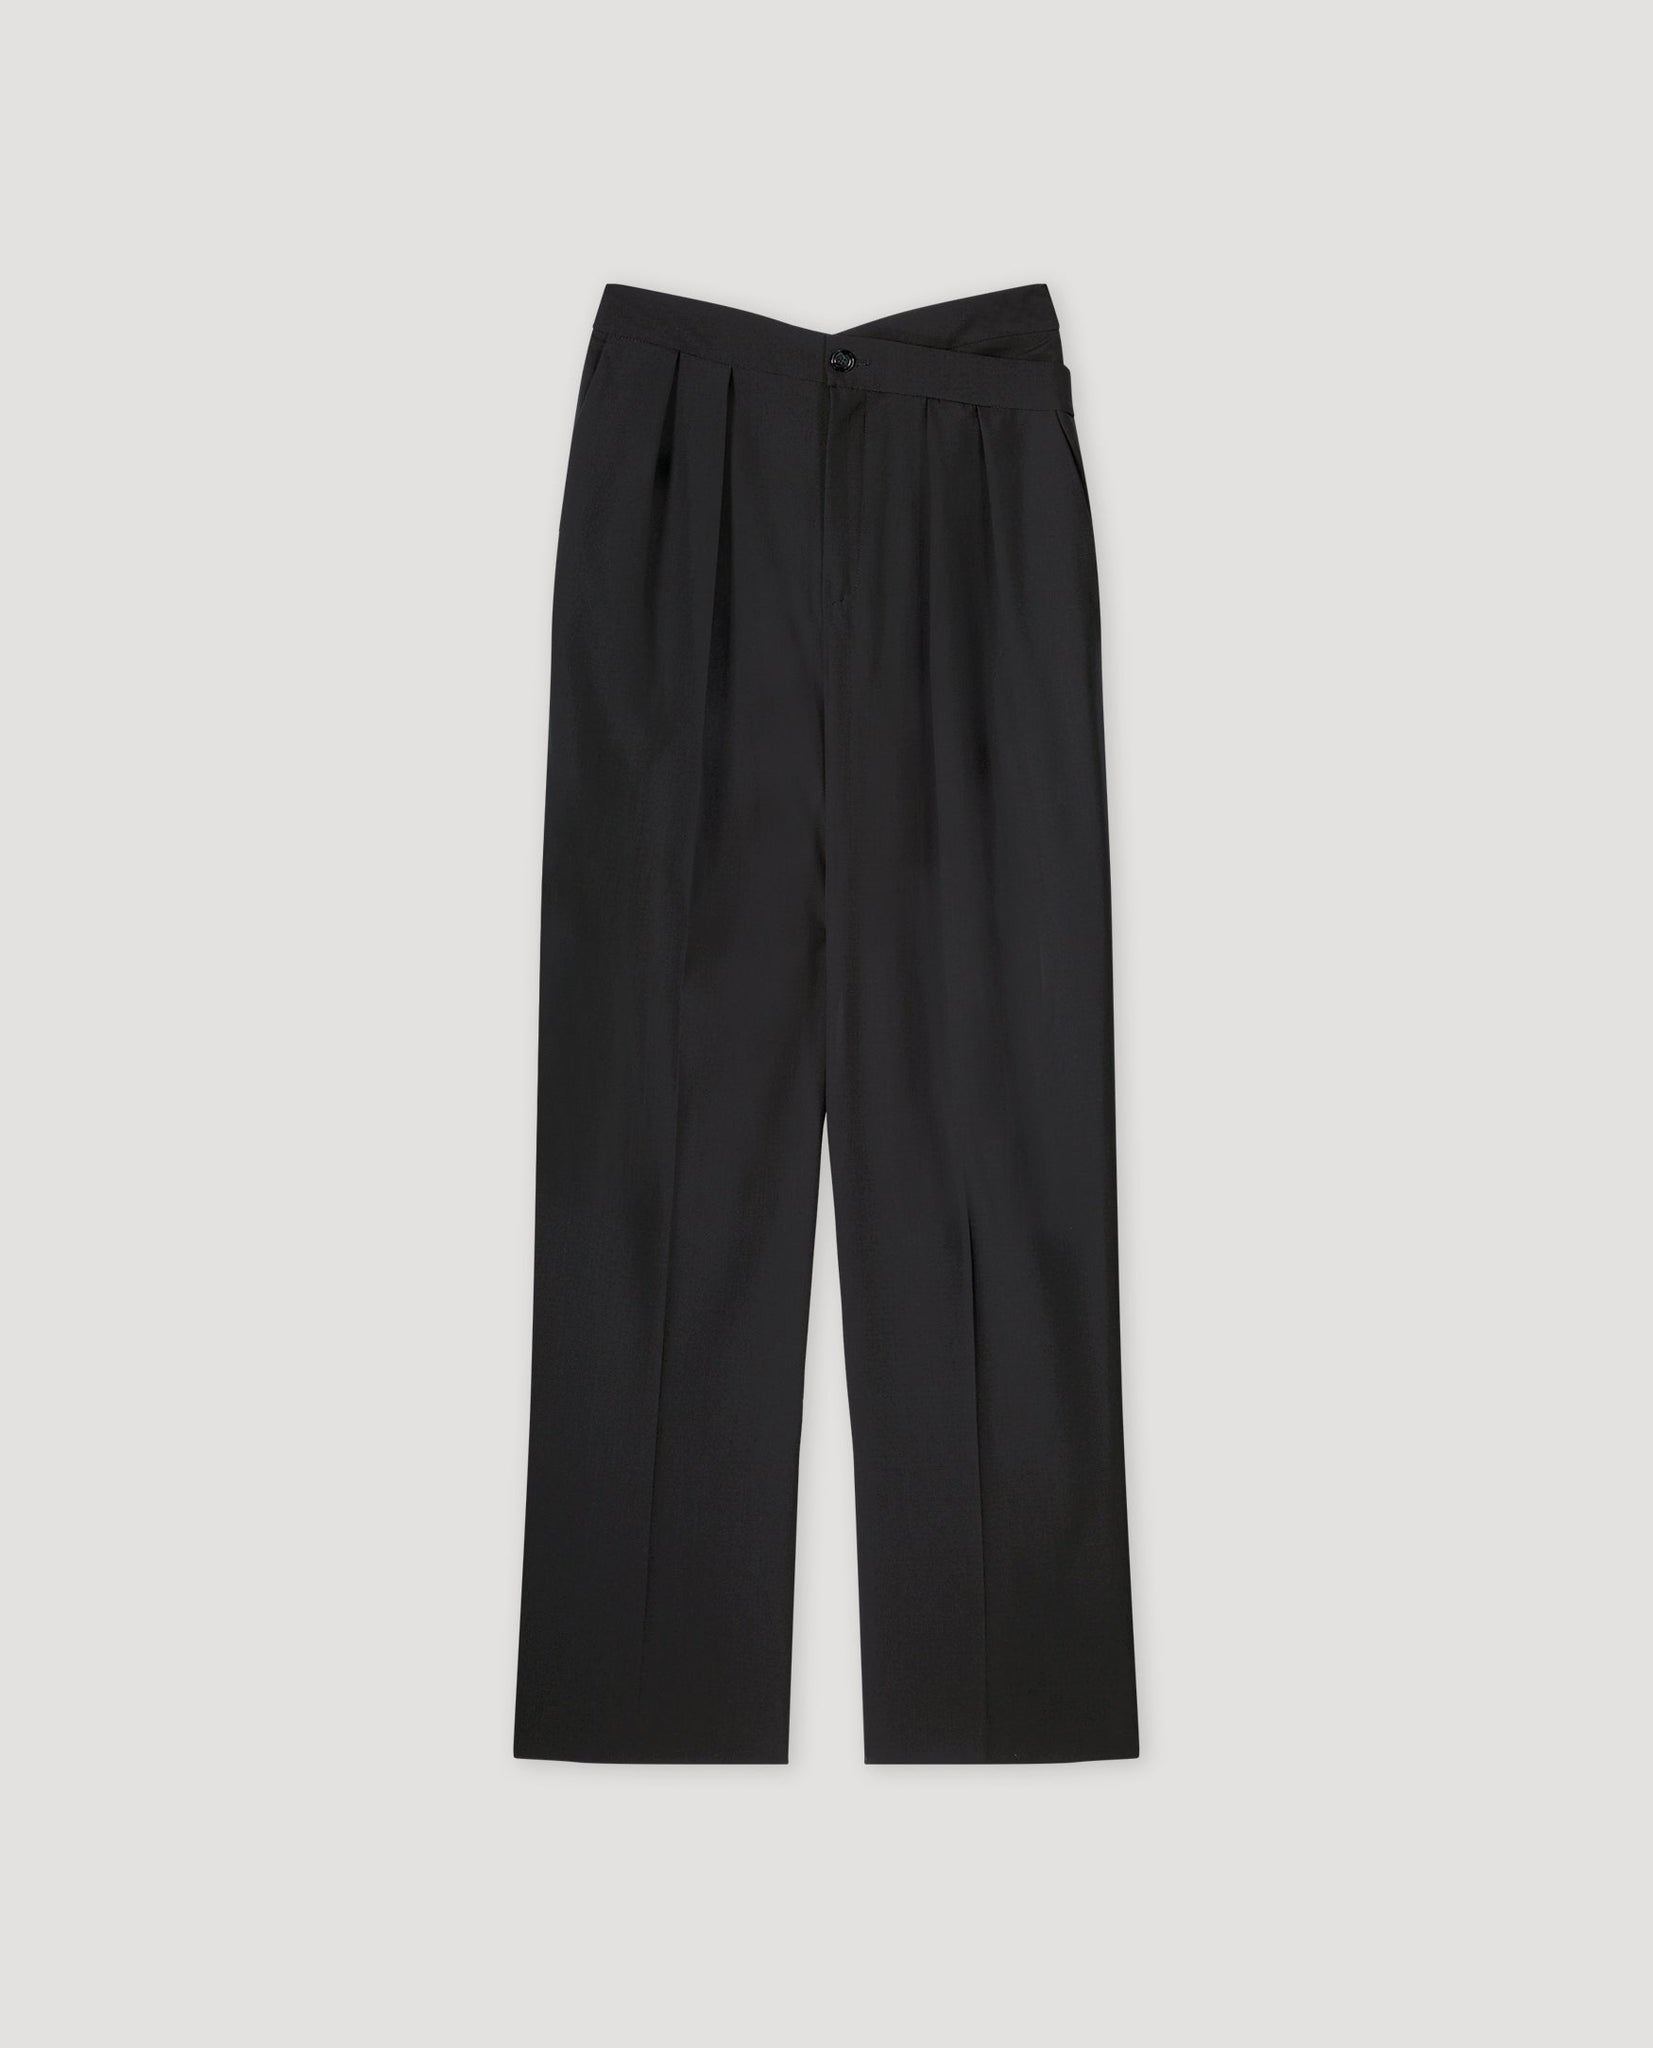 Siona trousers by Róhe Frames - noir